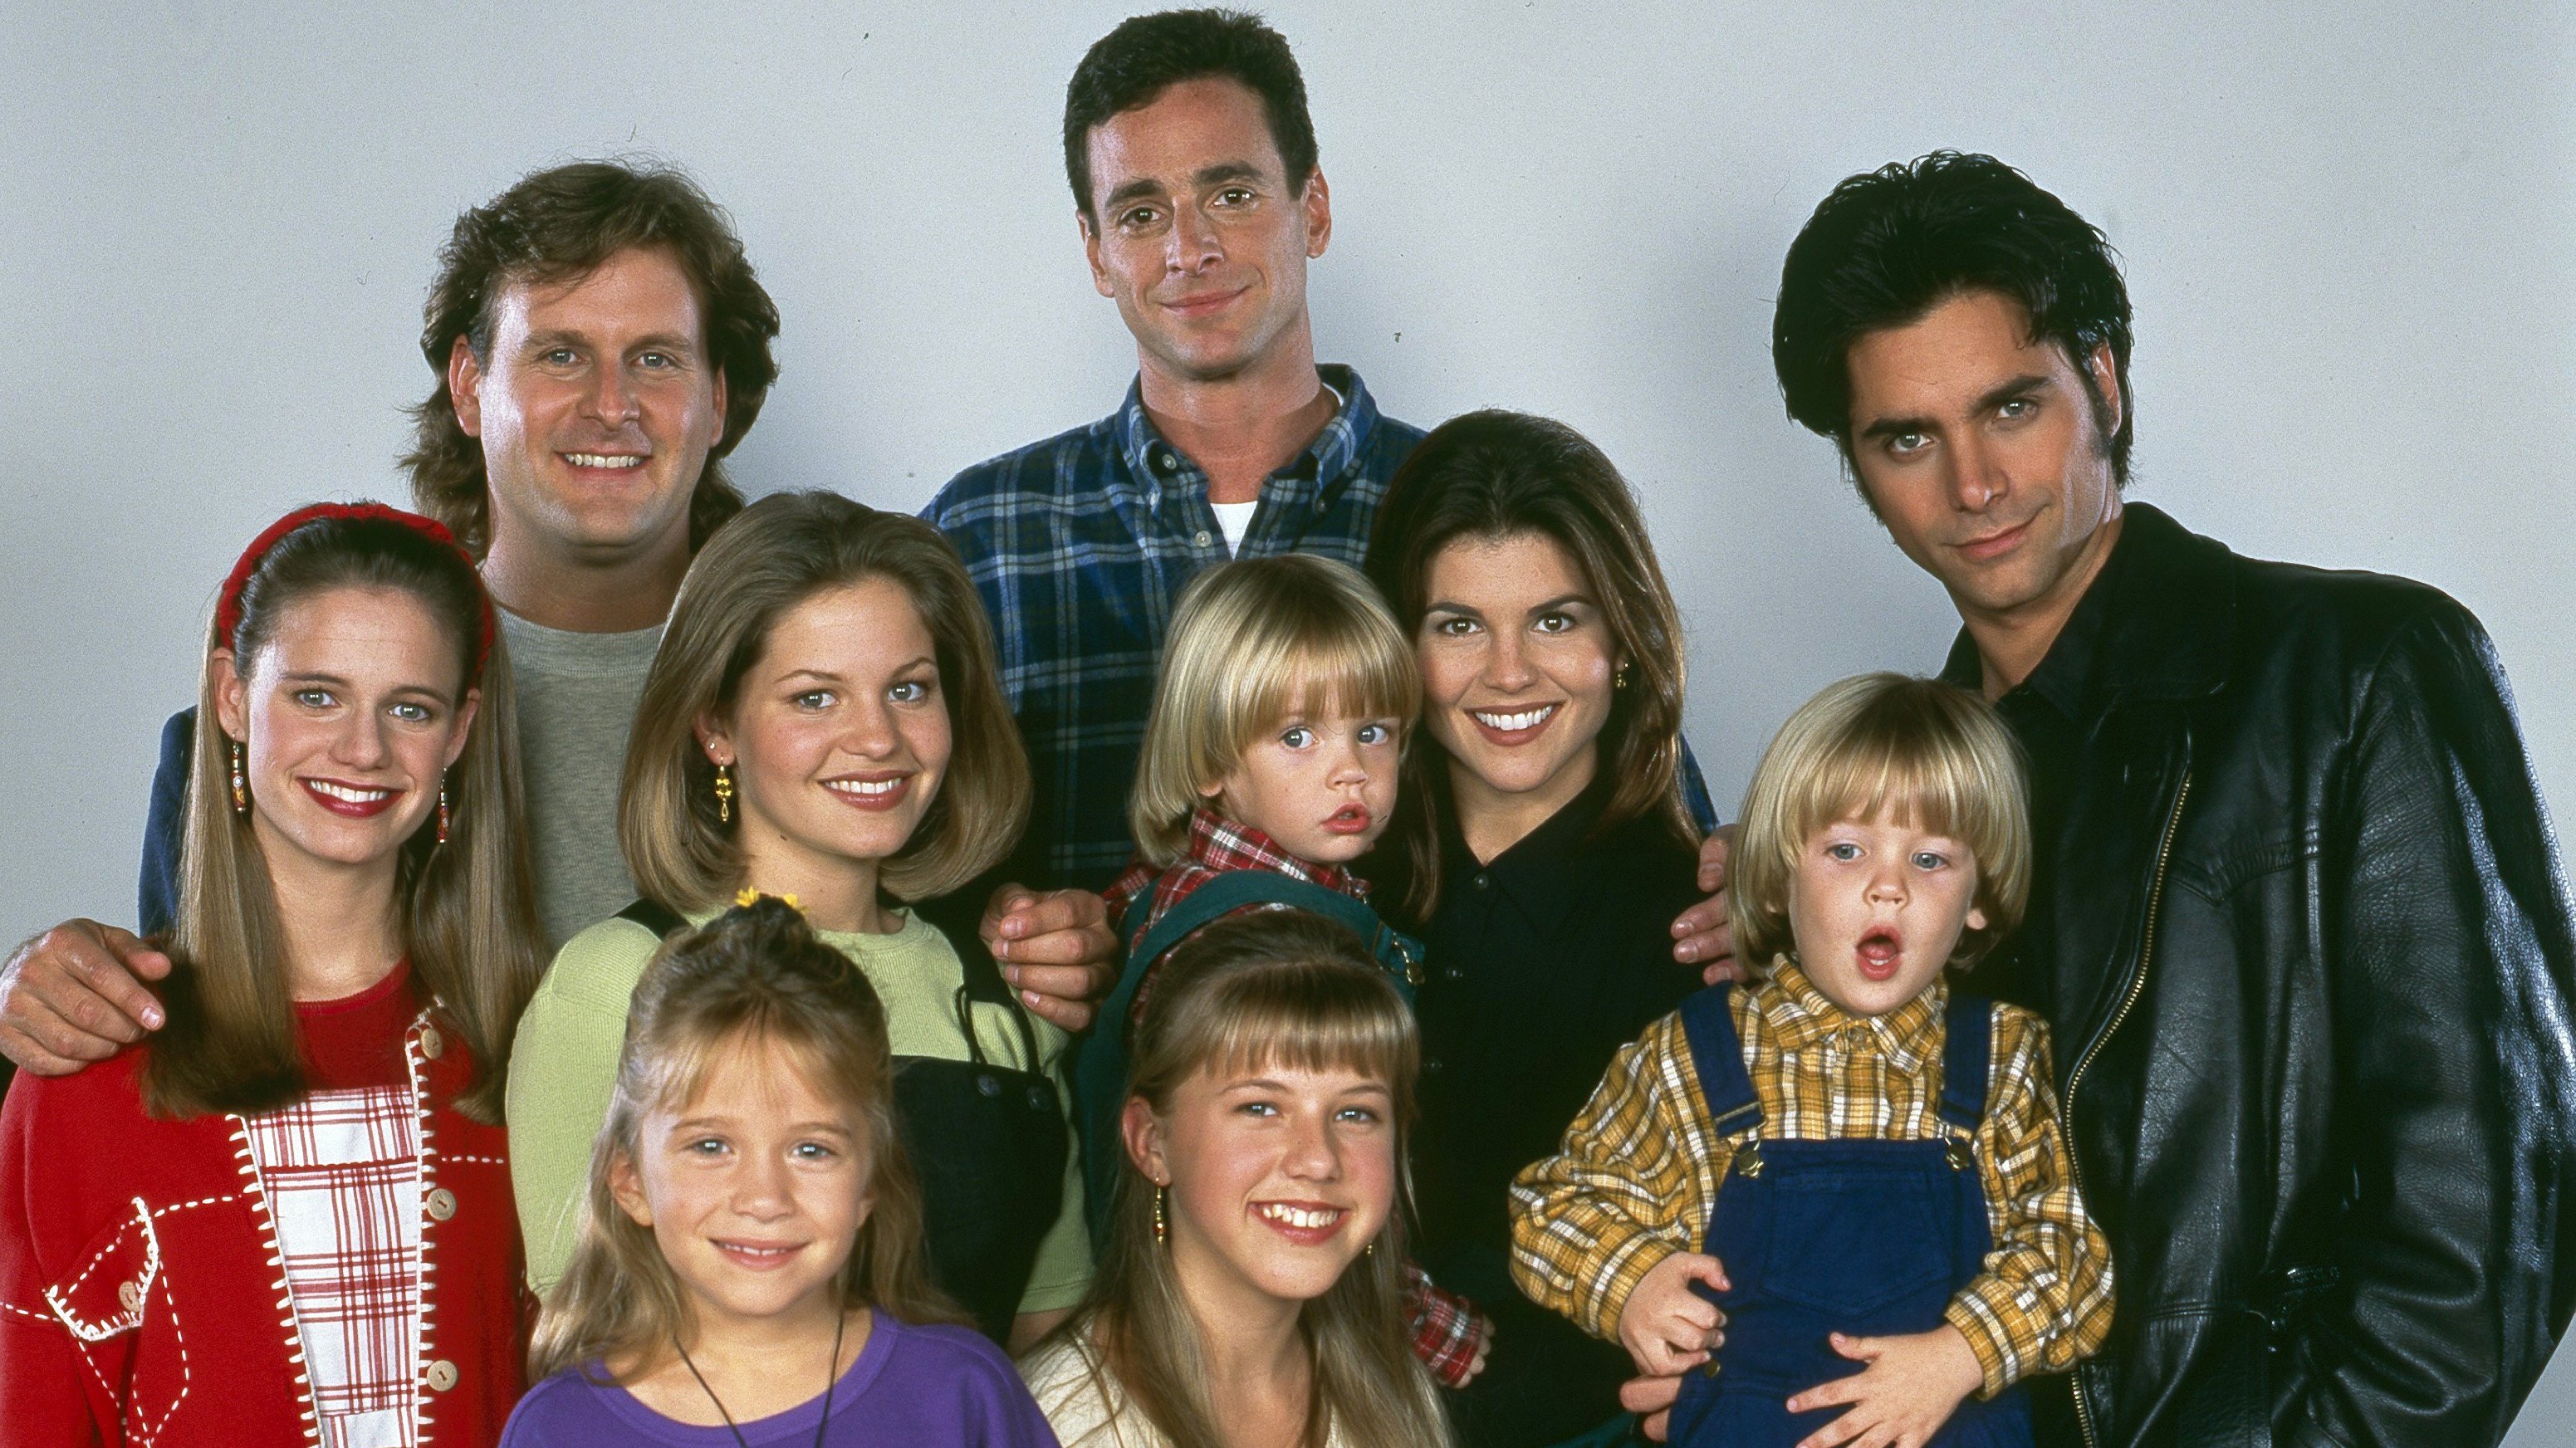 'Full House' cast: Where are they now?